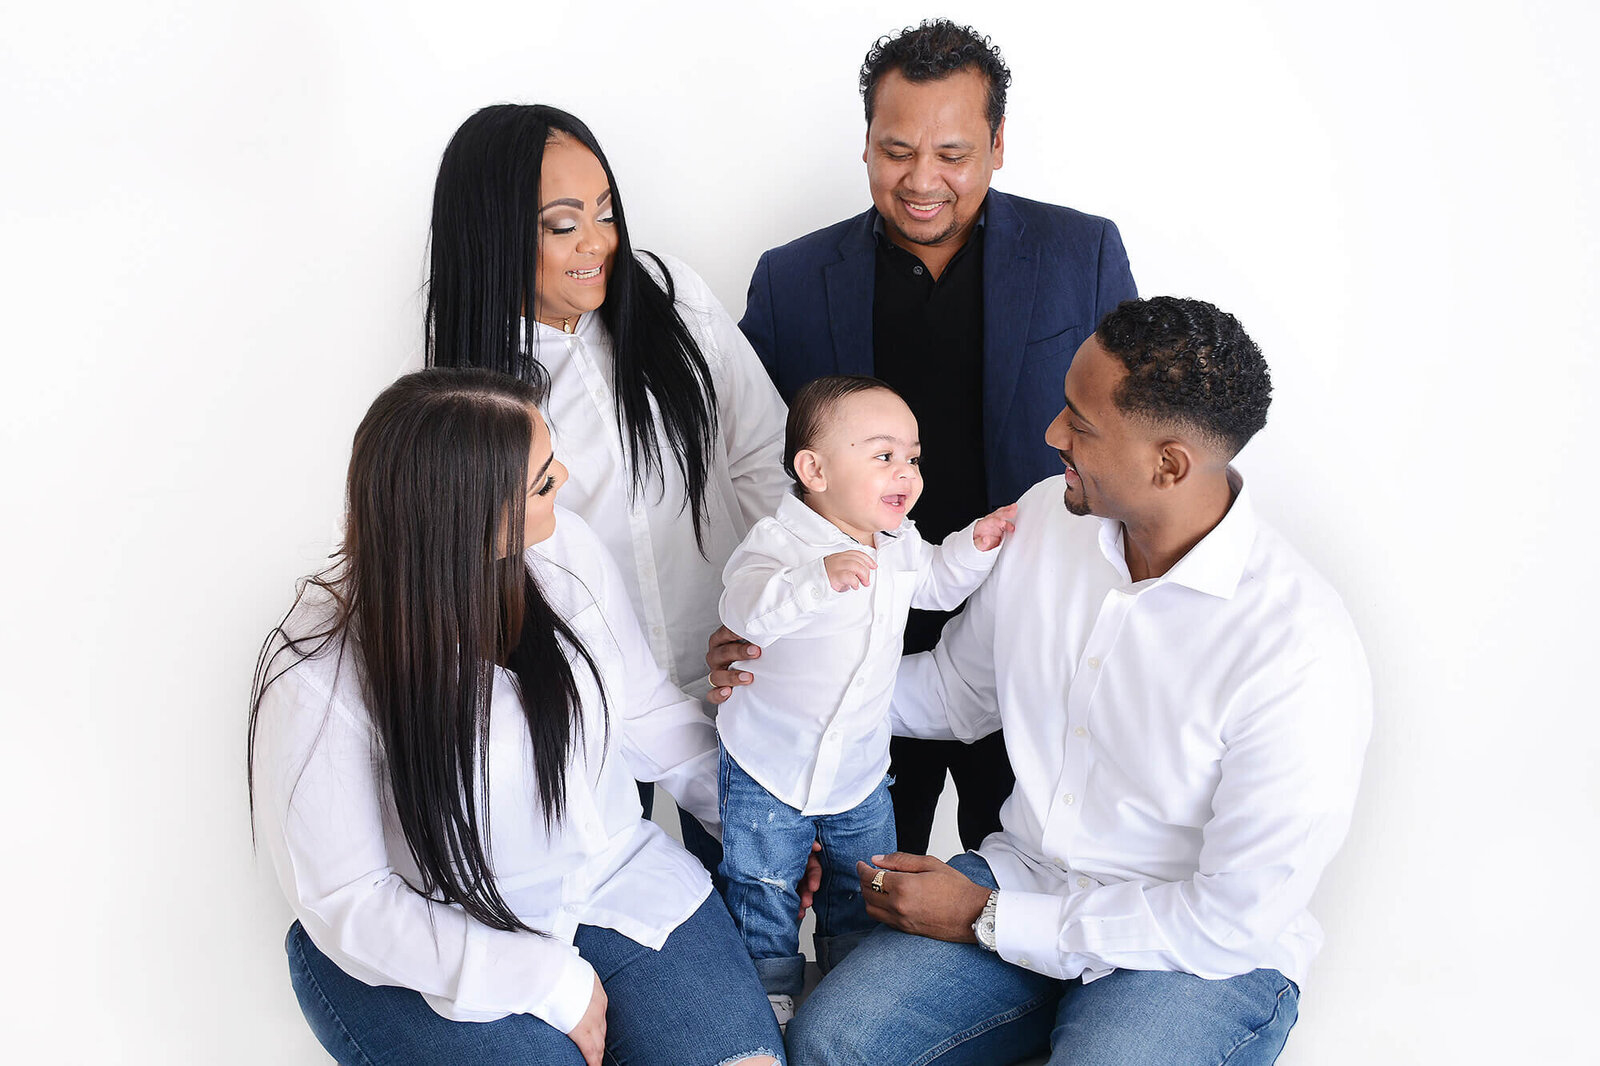 extended family smile at a baby boy at their photoshoot